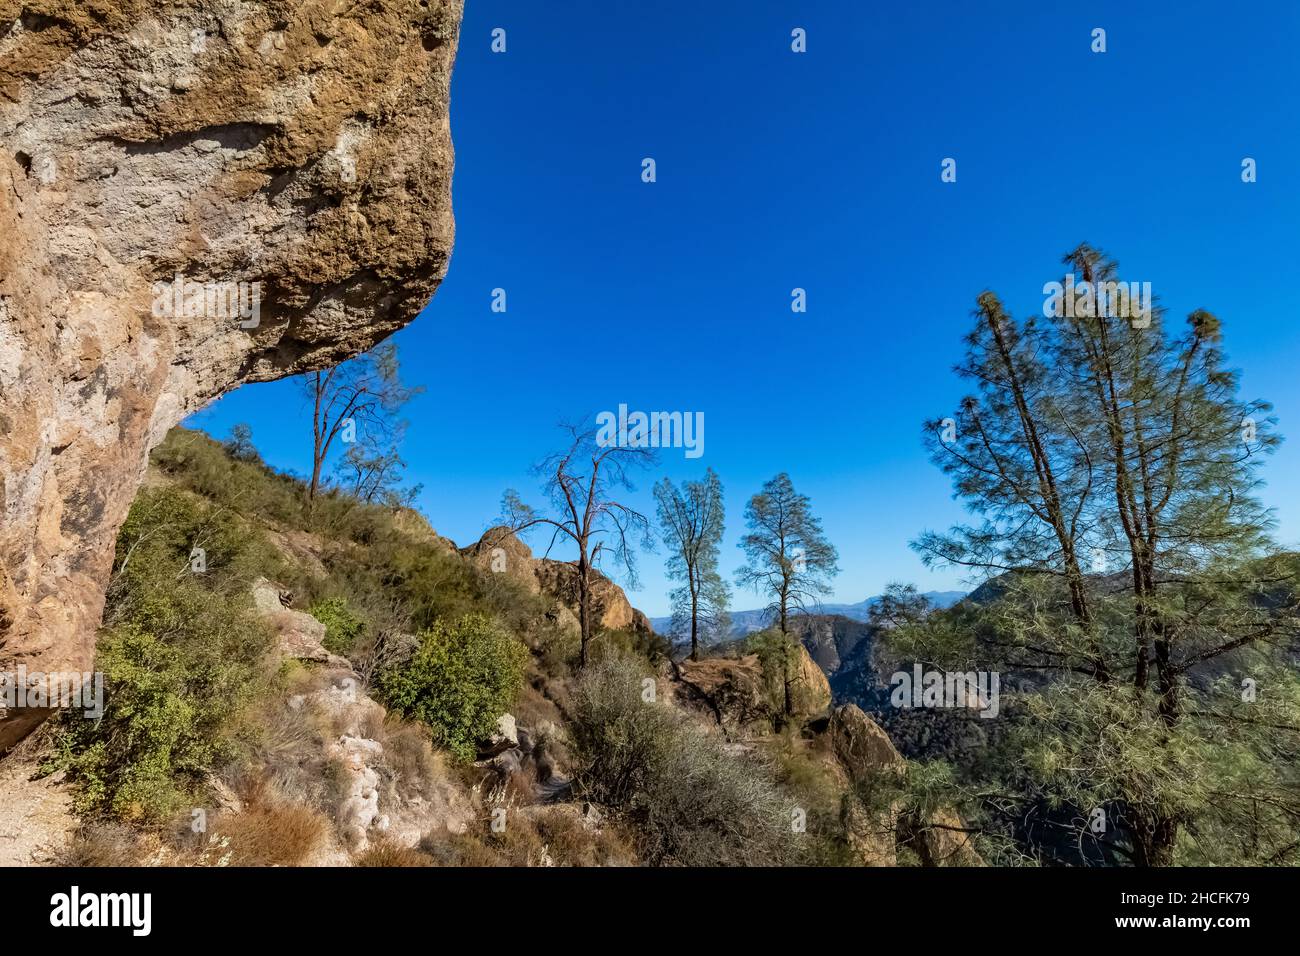 Hiking the High Peaks Trail, a challenging route built by the Civilian Conservation Corps during the Great Depression, Pinnacles National Park, Califo Stock Photo